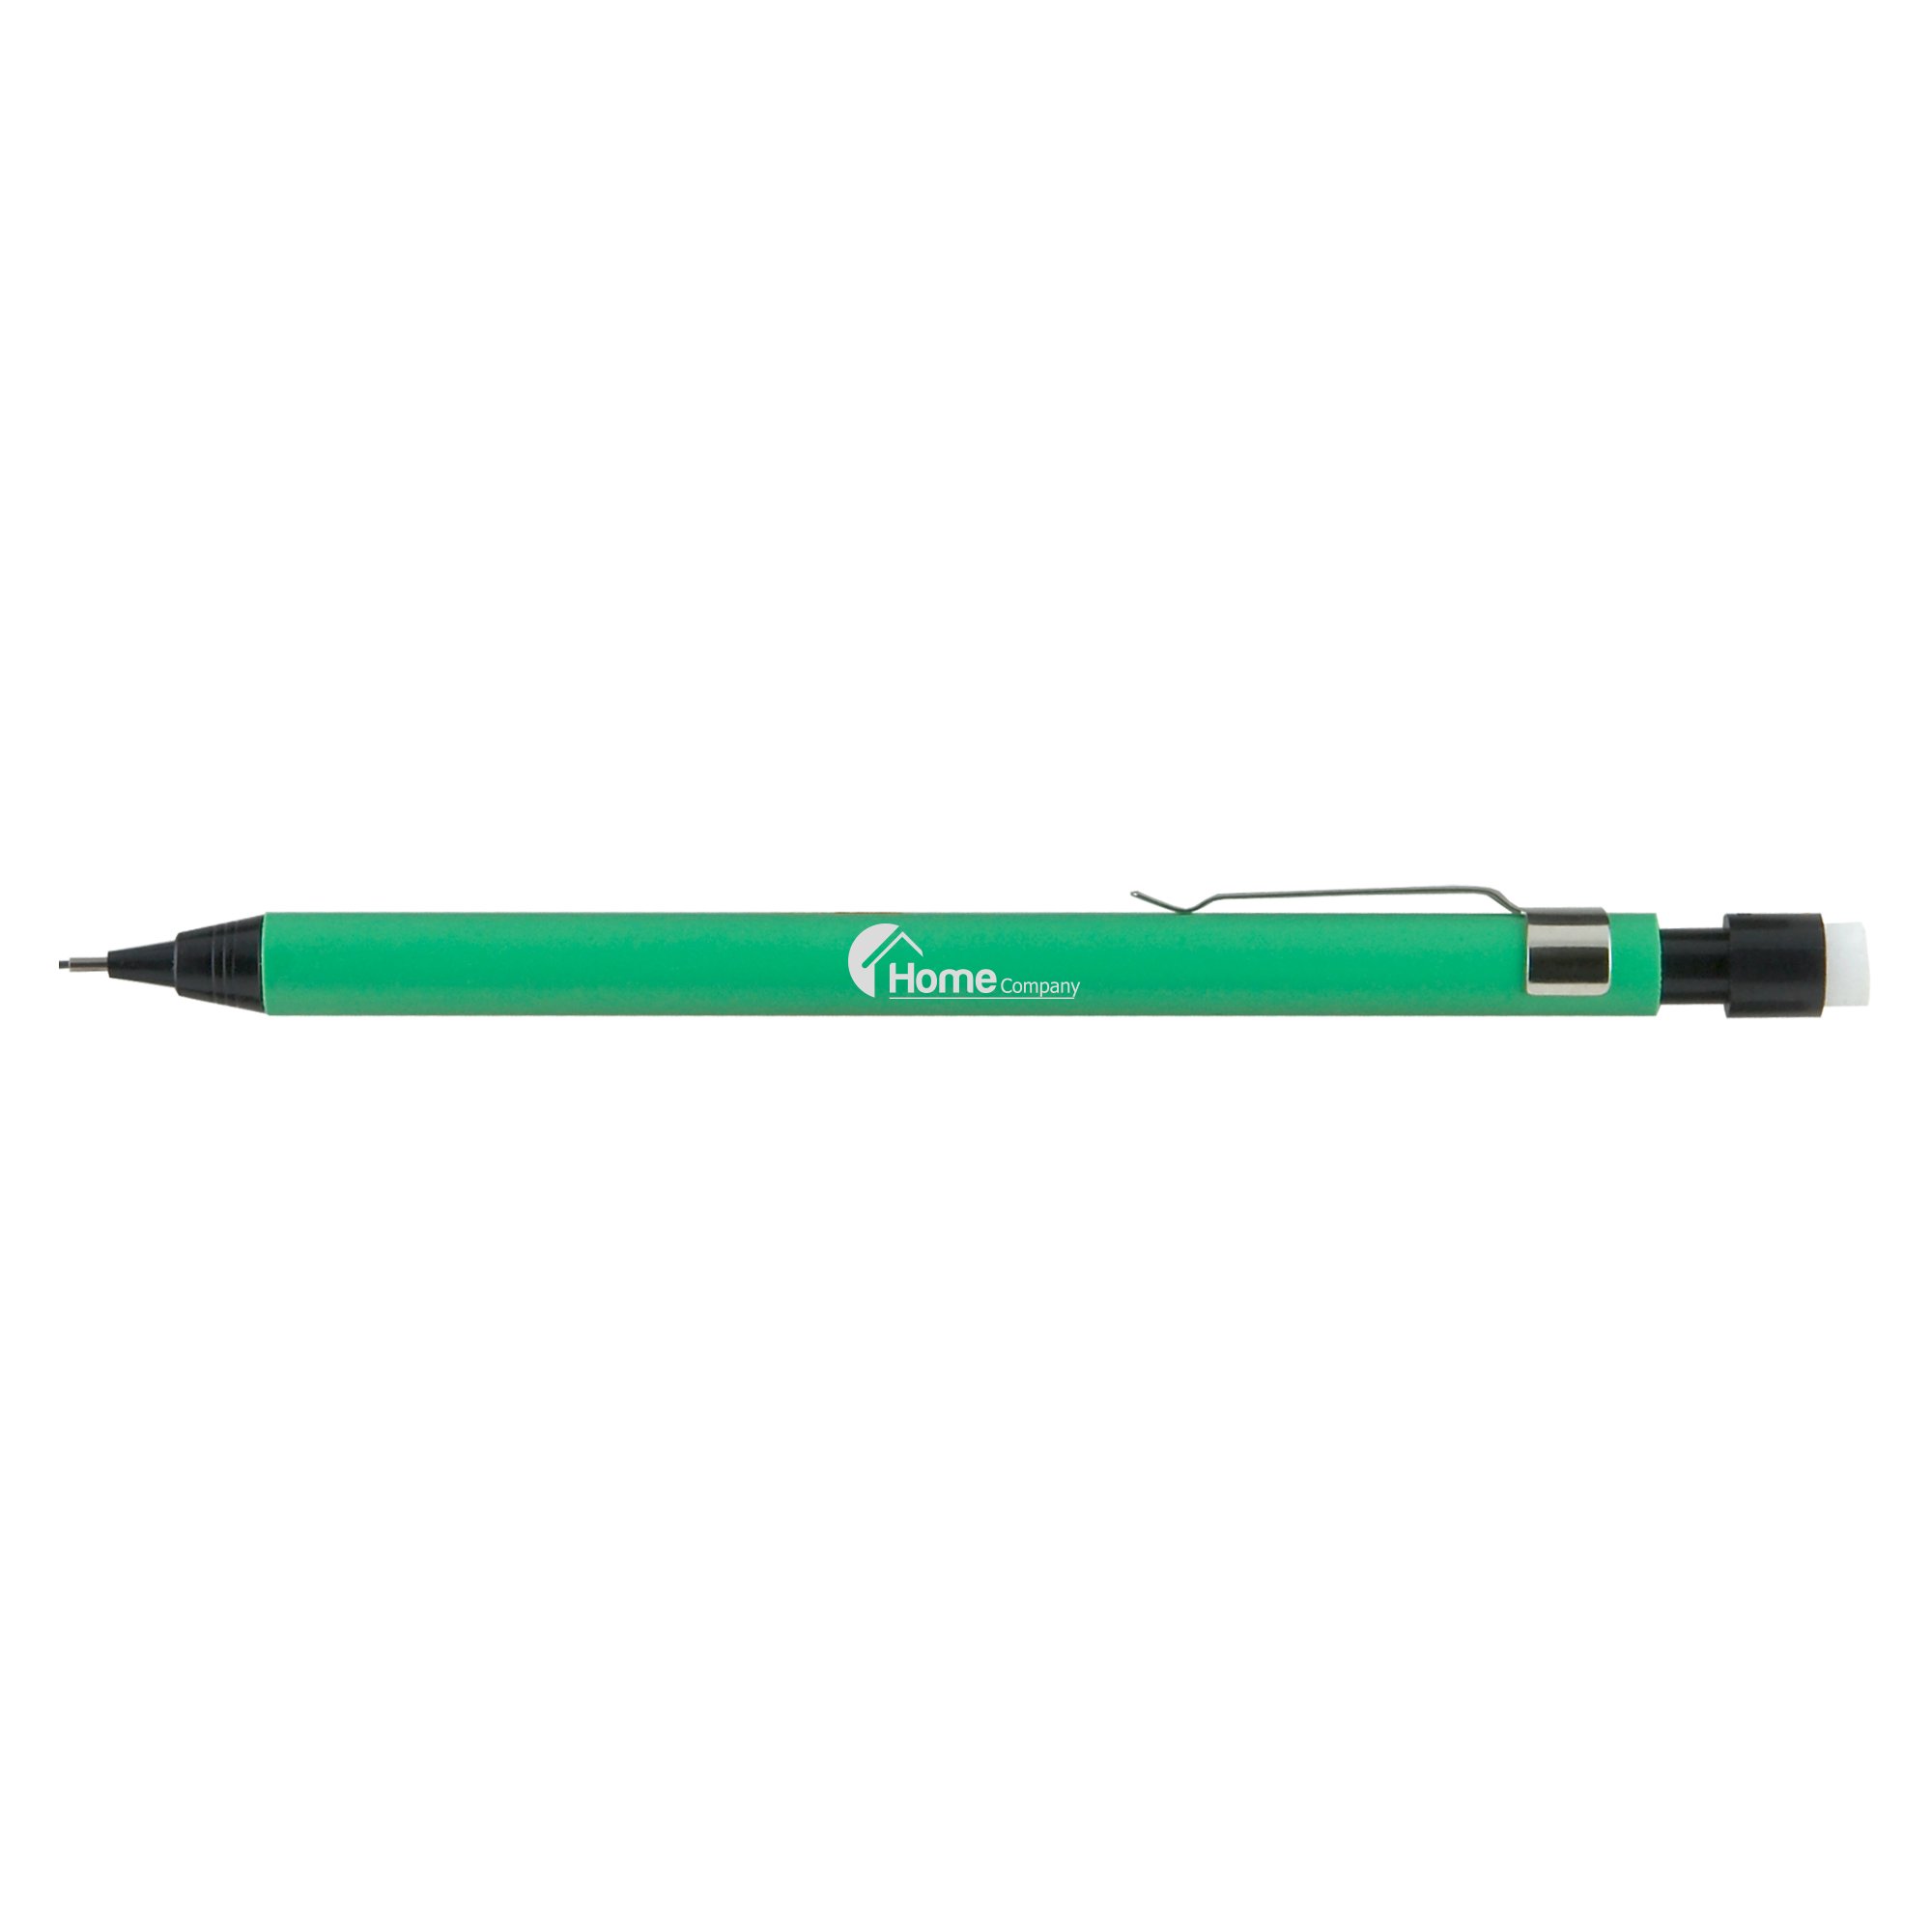 the mechanical pencil